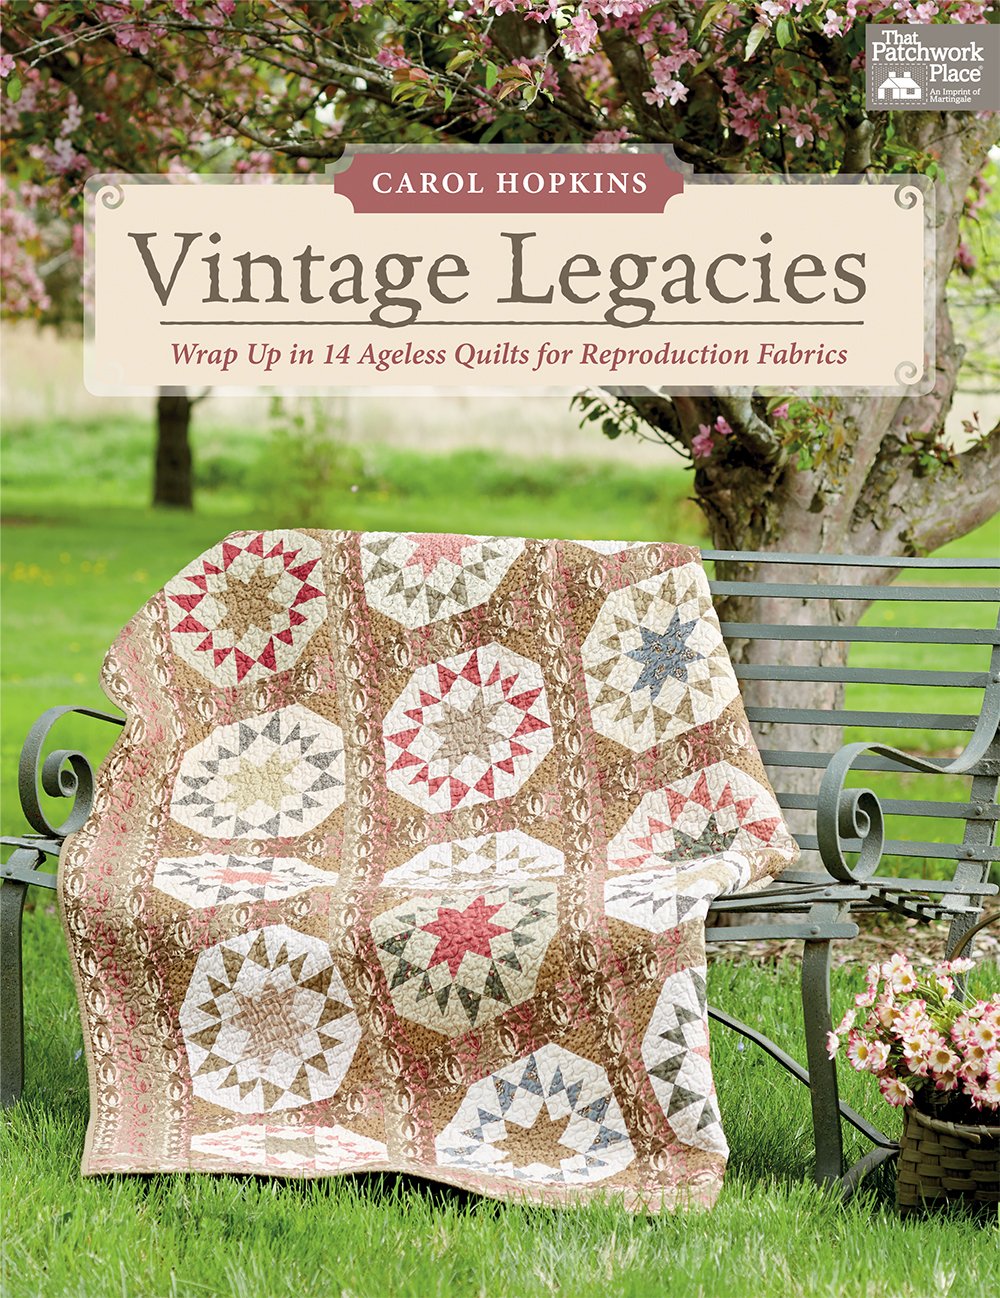 Vintage Legacies: Wrap Up in 14 Ageless Quilts for Reproduction Fabrics